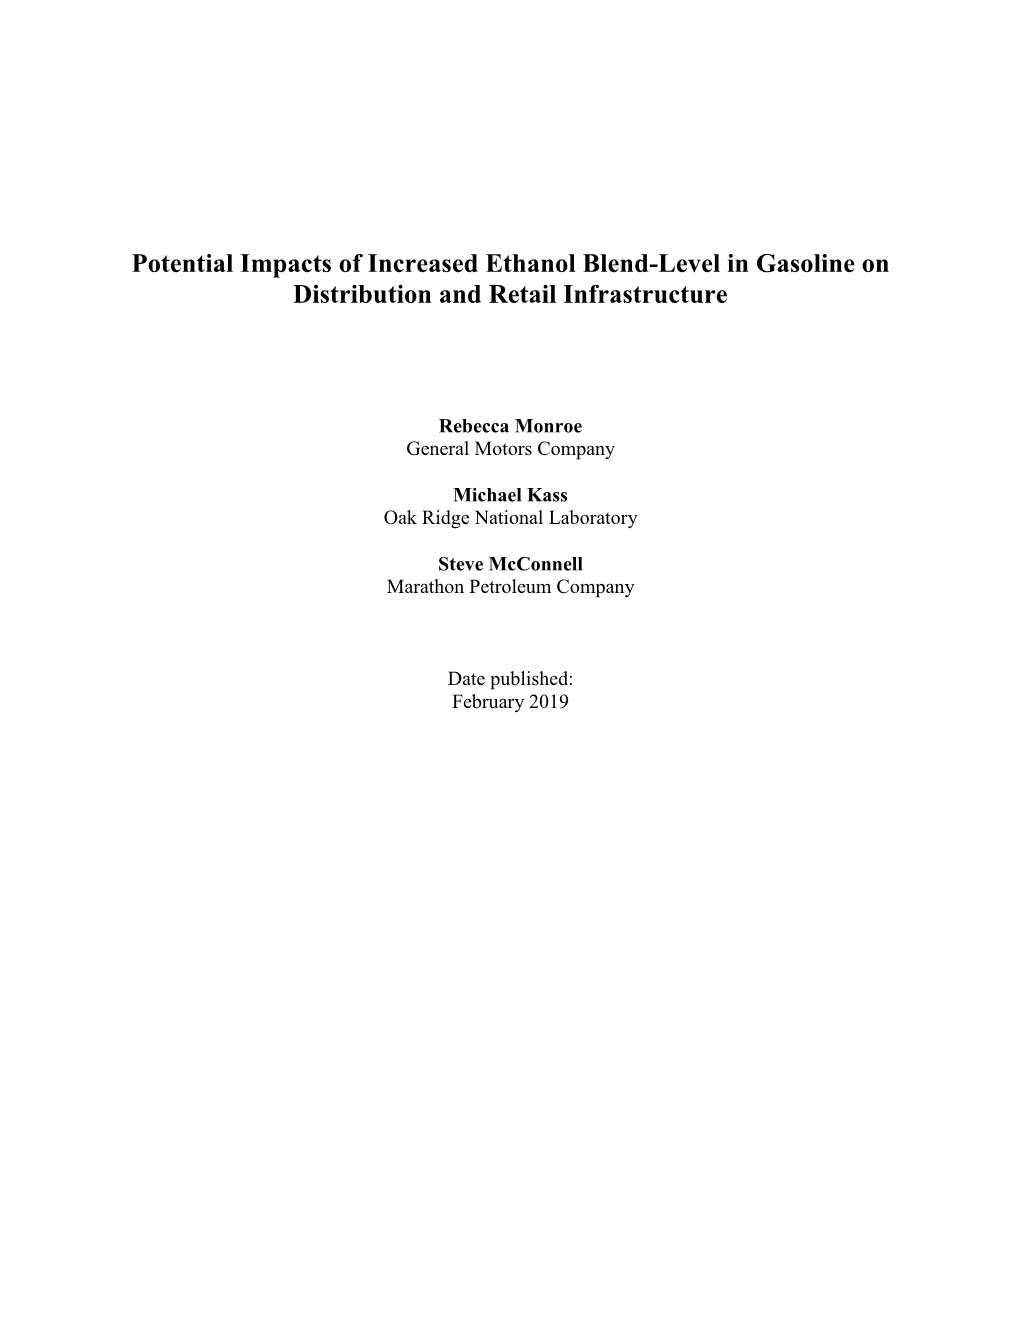 Potential Impacts of Increased Ethanol Blend-Level in Gasoline on Distribution and Retail Infrastructure